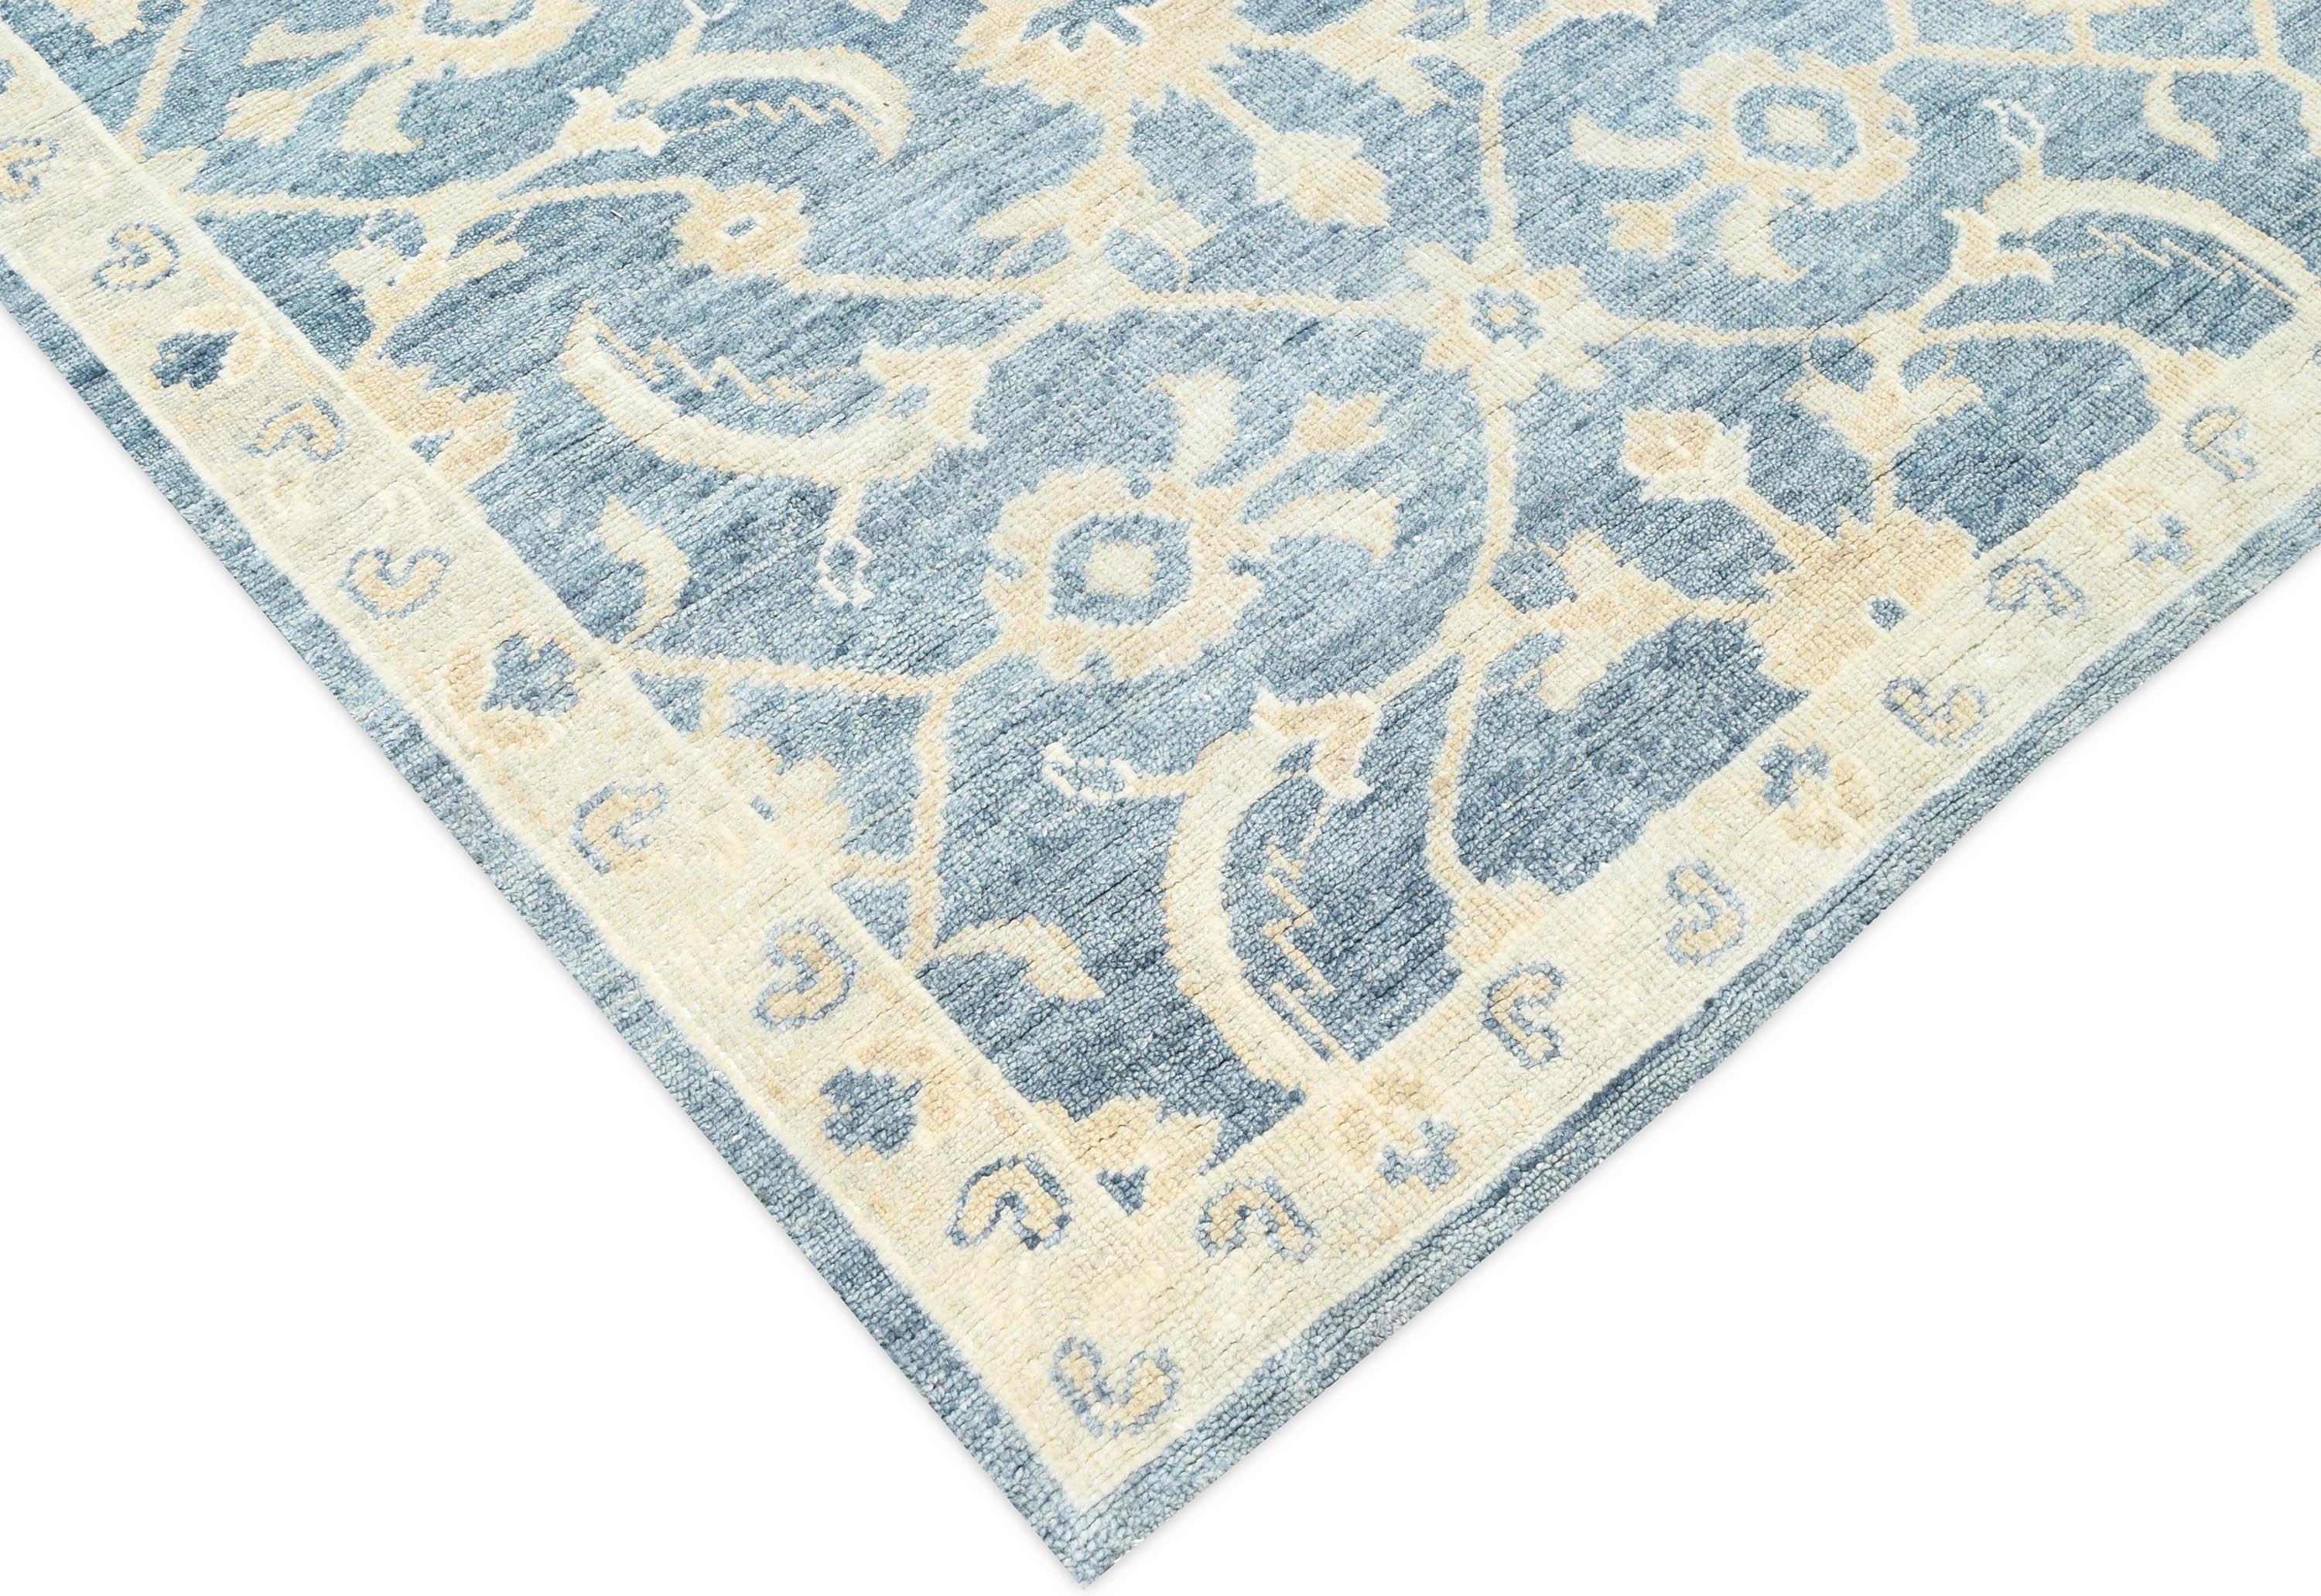 Hand Woven Luxury Blue / Beige Area Rug In New Condition For Sale In Secaucus, NJ